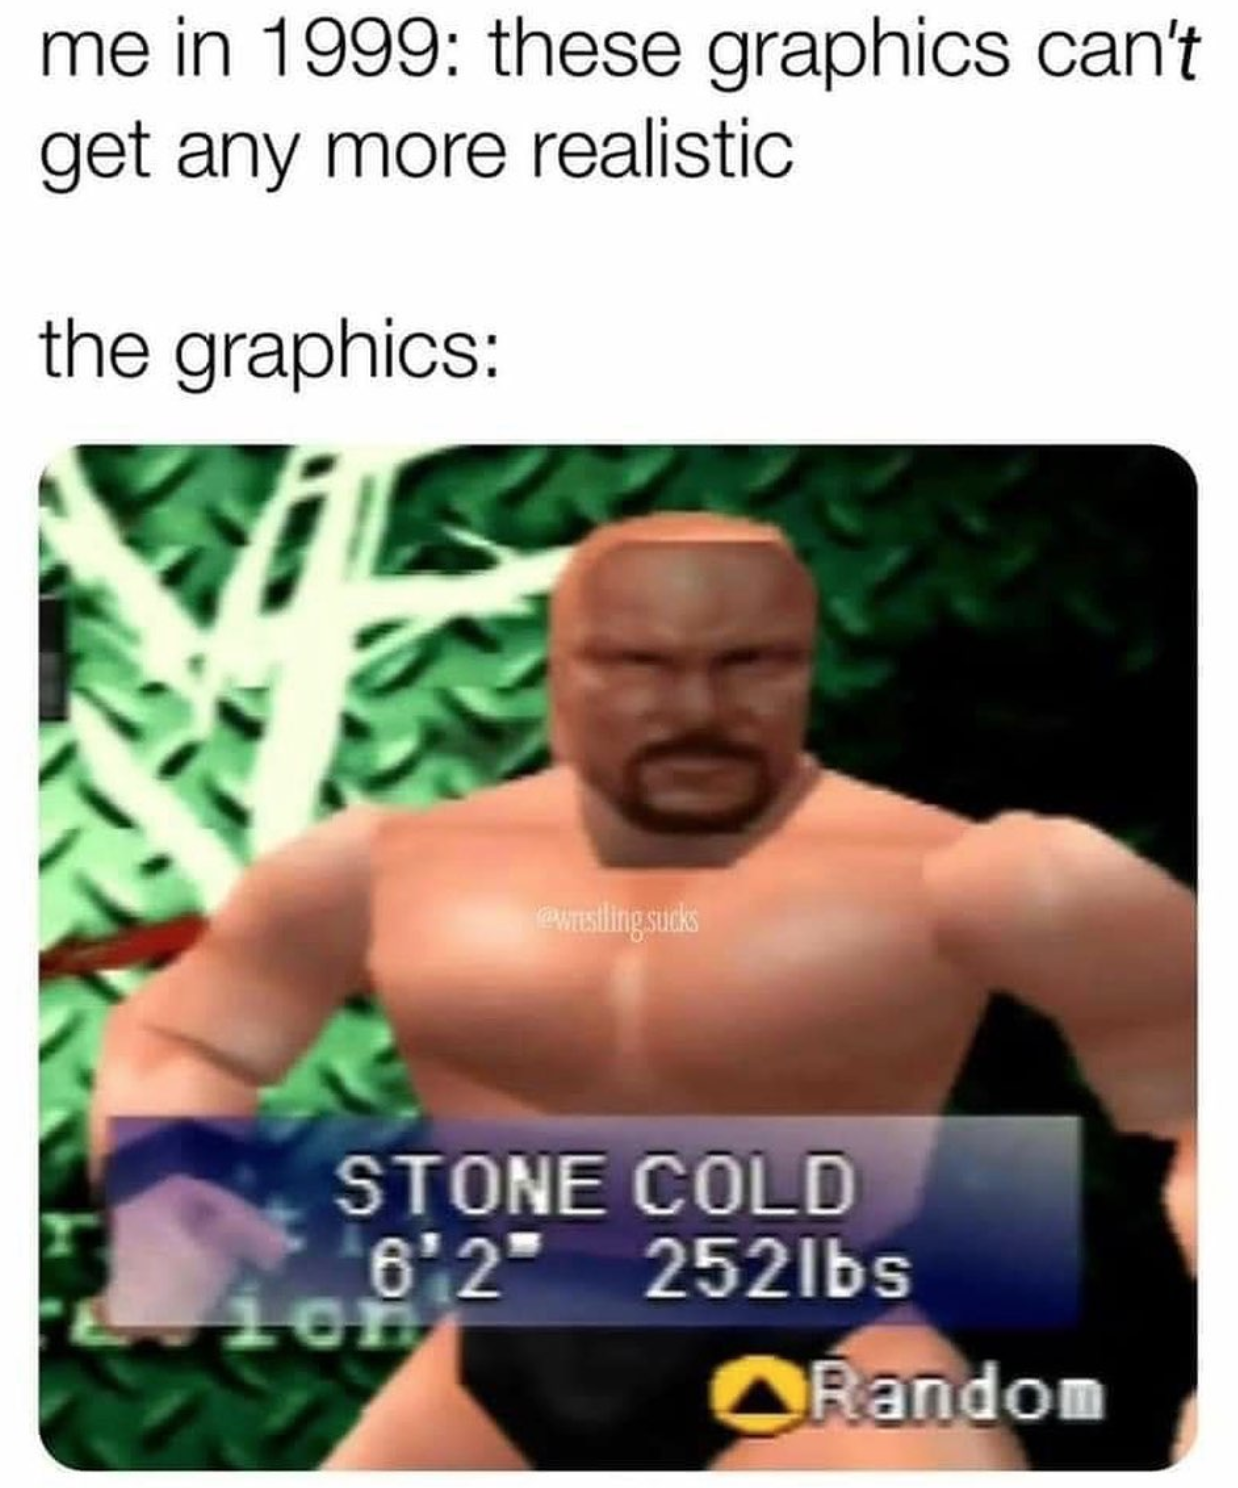 funny gaming memes - muscle - me in 1999 these graphics can't get any more realistic the graphics piling Stone Cold 6'2252lbs Random